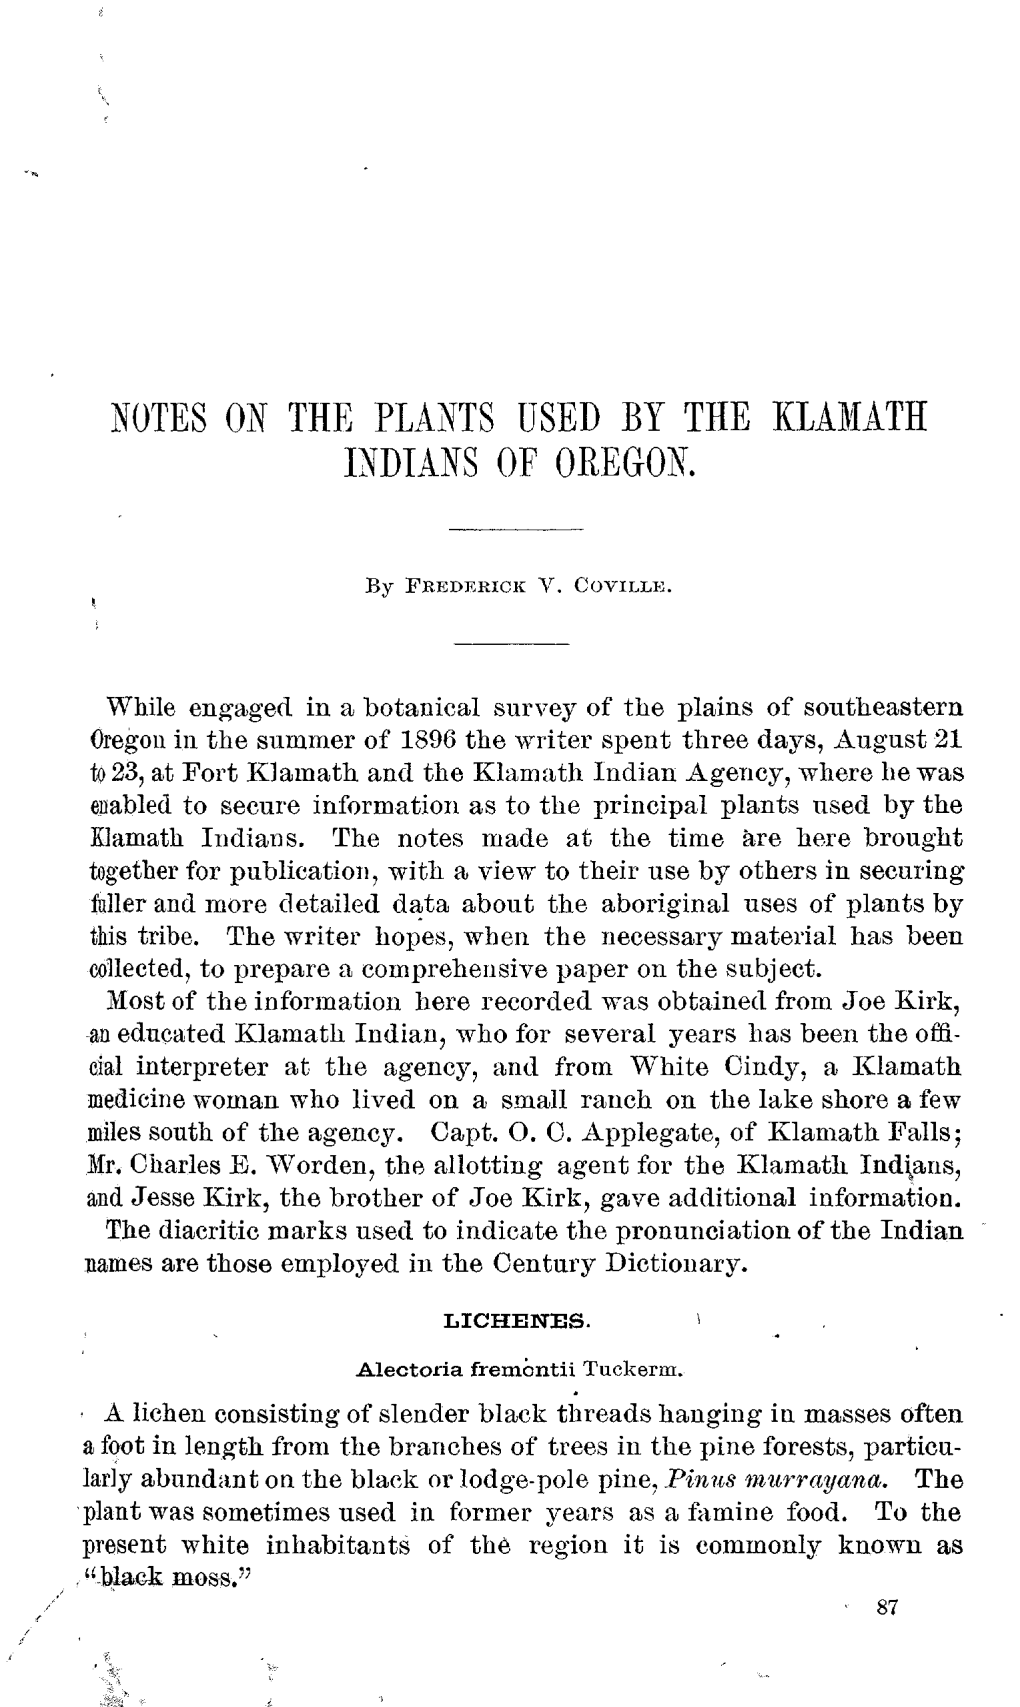 Notes on the Plants Used by the Klamath Indians of Oregon, 1897